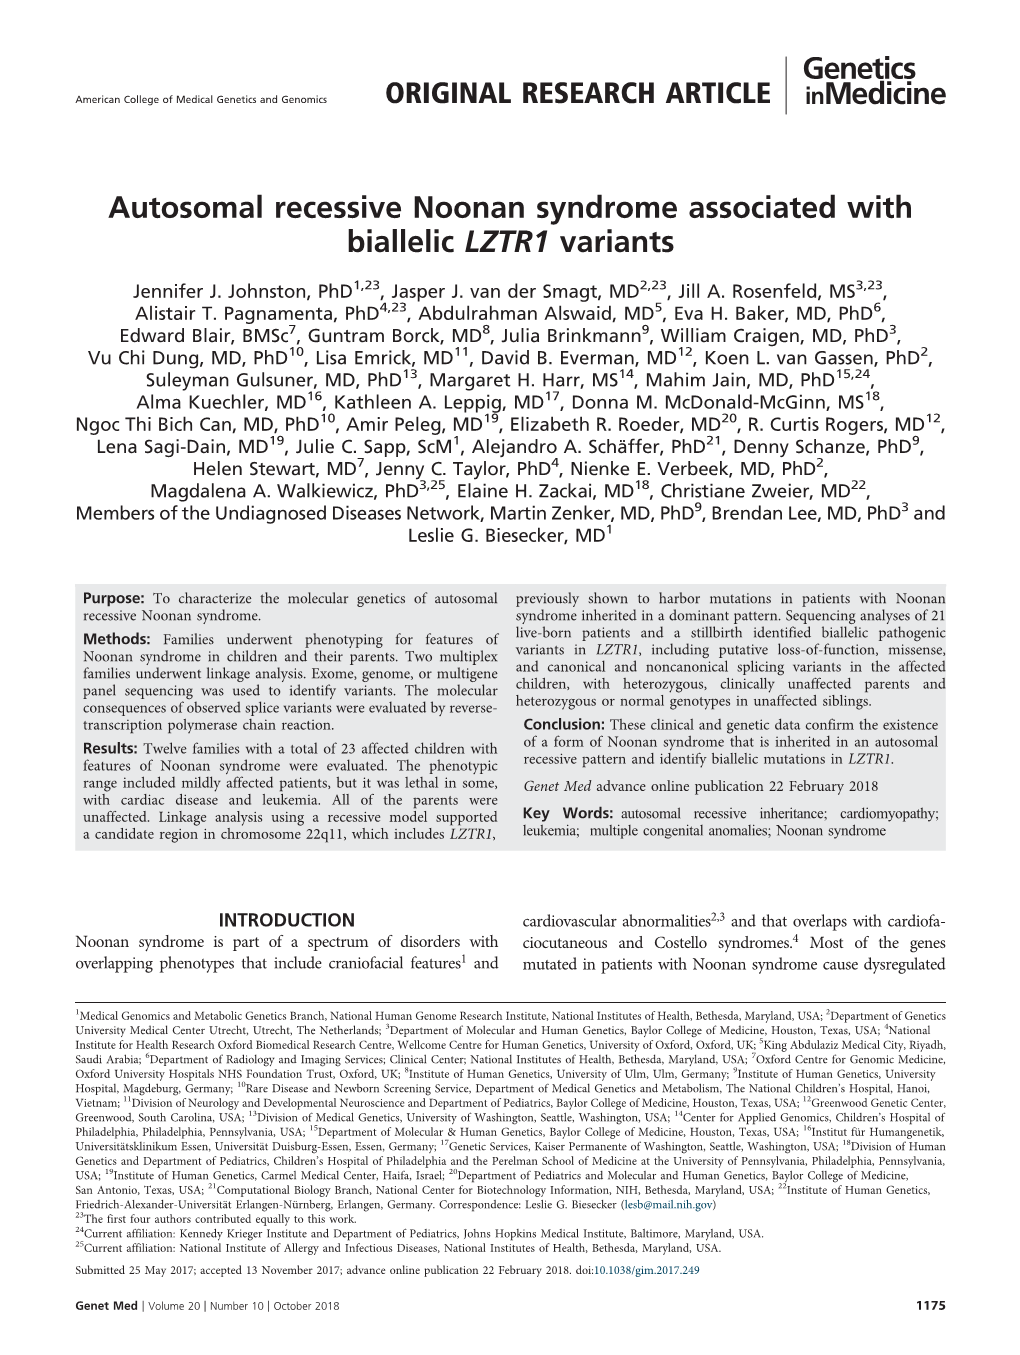 Autosomal Recessive Noonan Syndrome Associated with Biallelic LZTR1 Variants